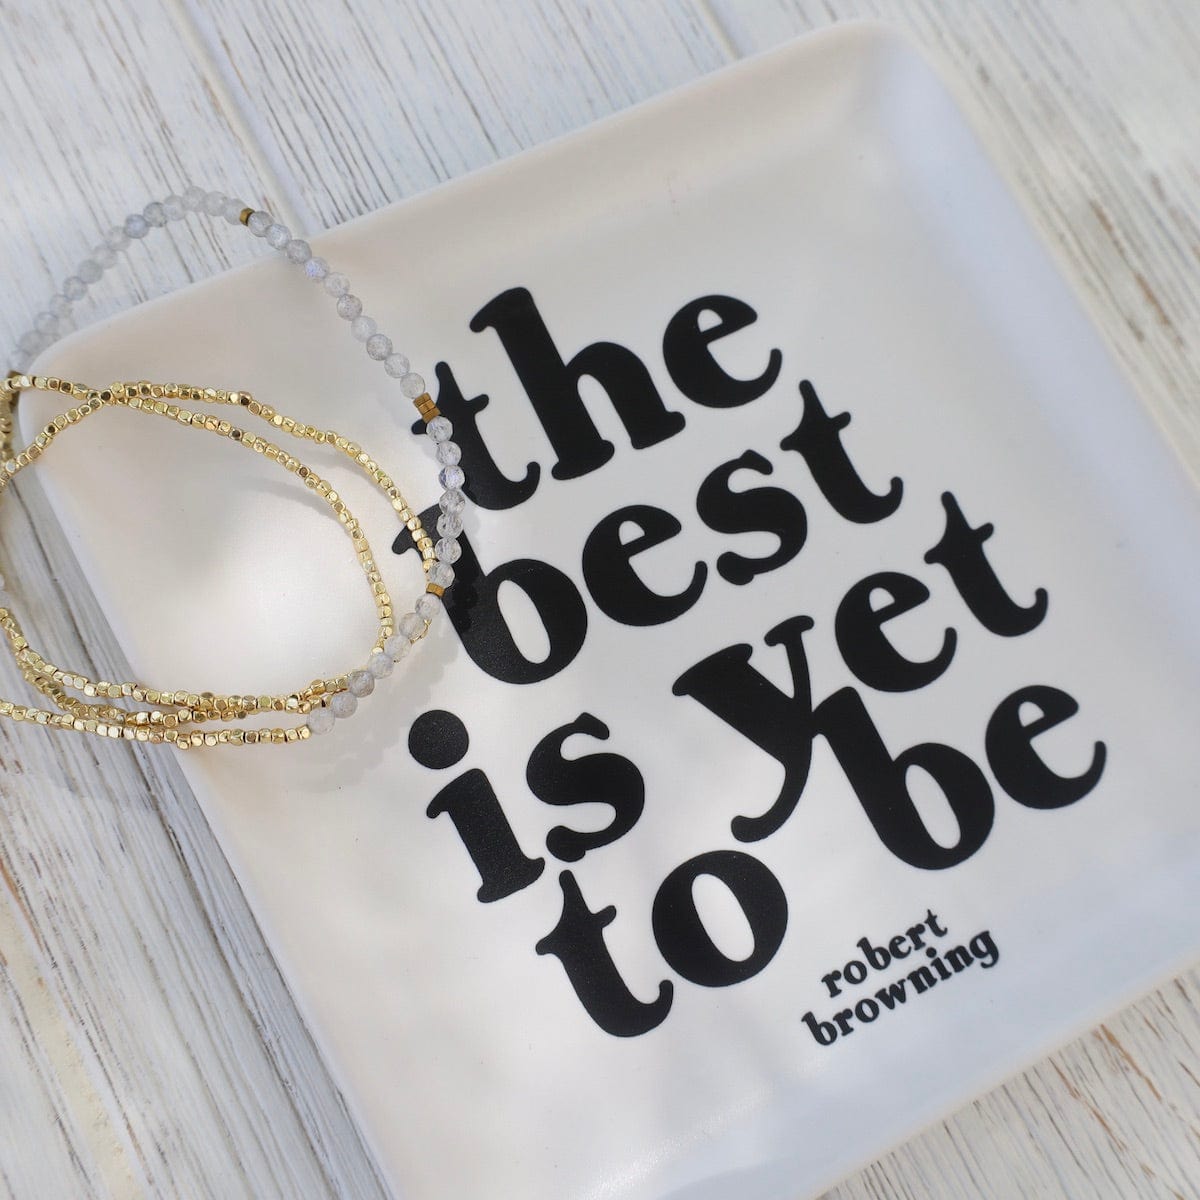 GIFT "The best is yet to be" Trinket Dish